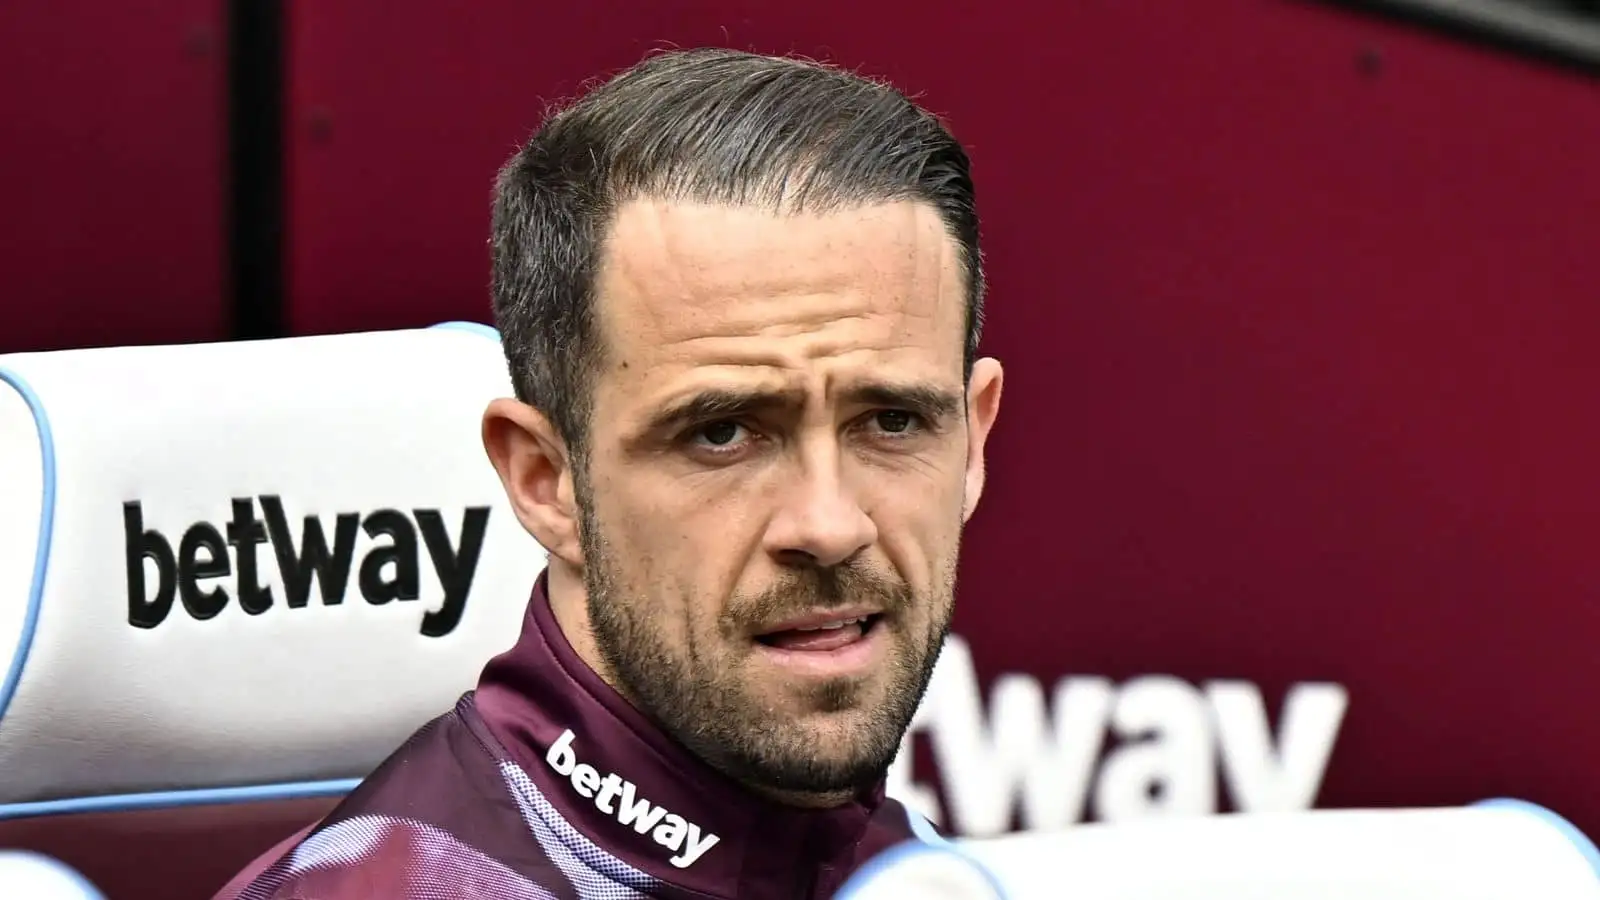 Danny Ings (West Ham) during the West Ham vs Arsenal Premier League match at the London Stadium